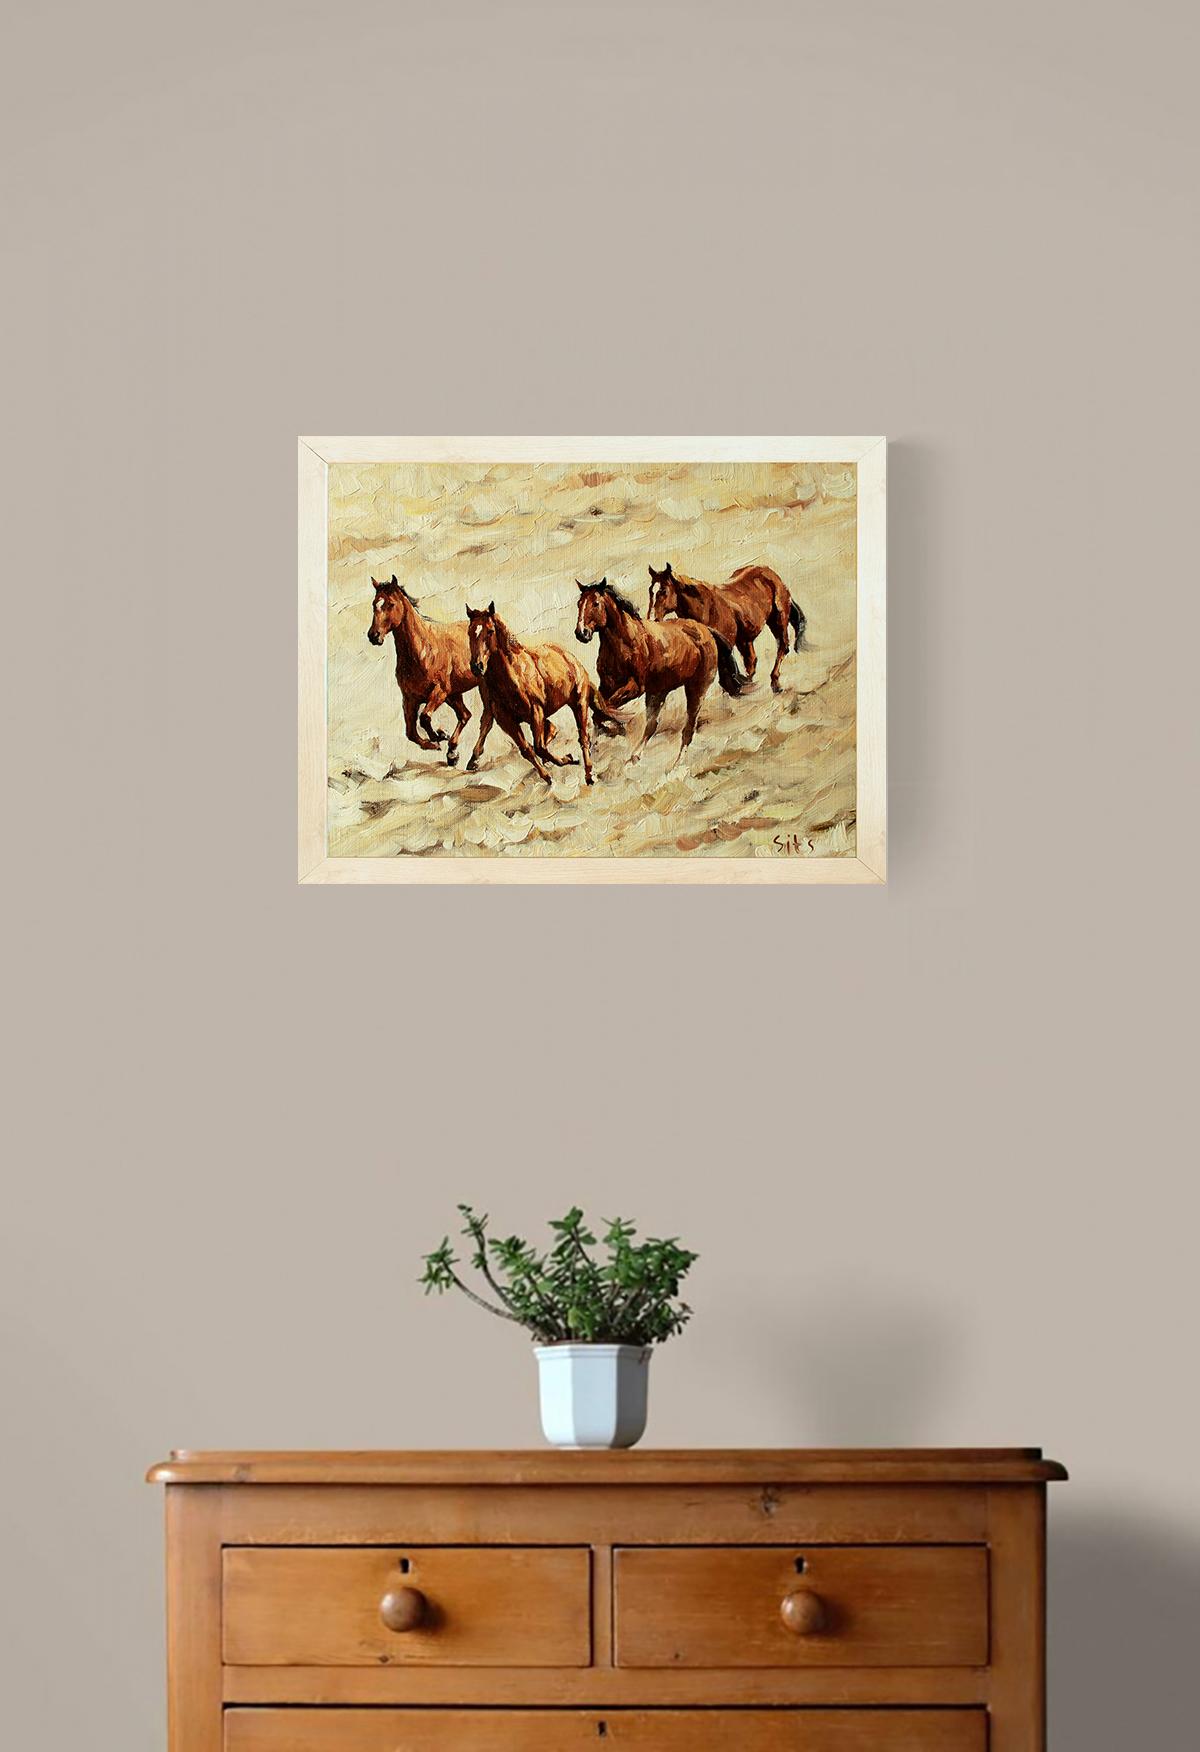 Modern, expressive landscape. Running, speed, wind, inner freedom. It's all about horses. Sometimes you want to feel as free and light as the wind.
• It is painted on a professional canvas with high quality oil paints.
• The painting is framed.